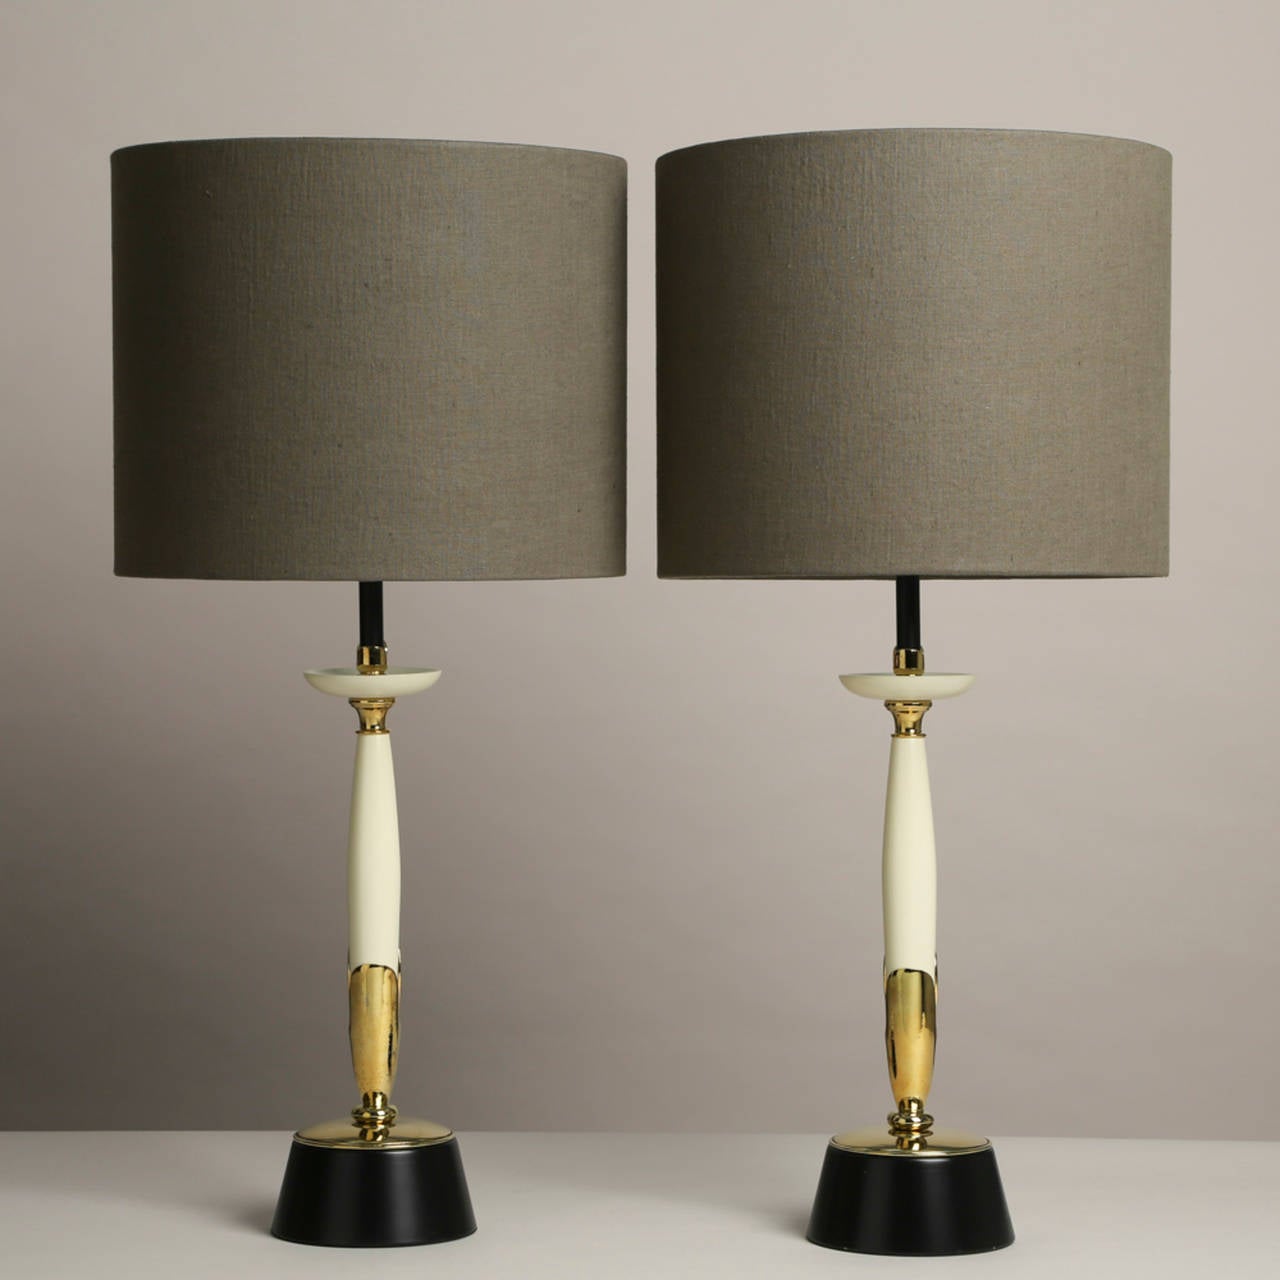 American A Pair of Cream and Brass Rembrandt designed Table Lamps 1960s